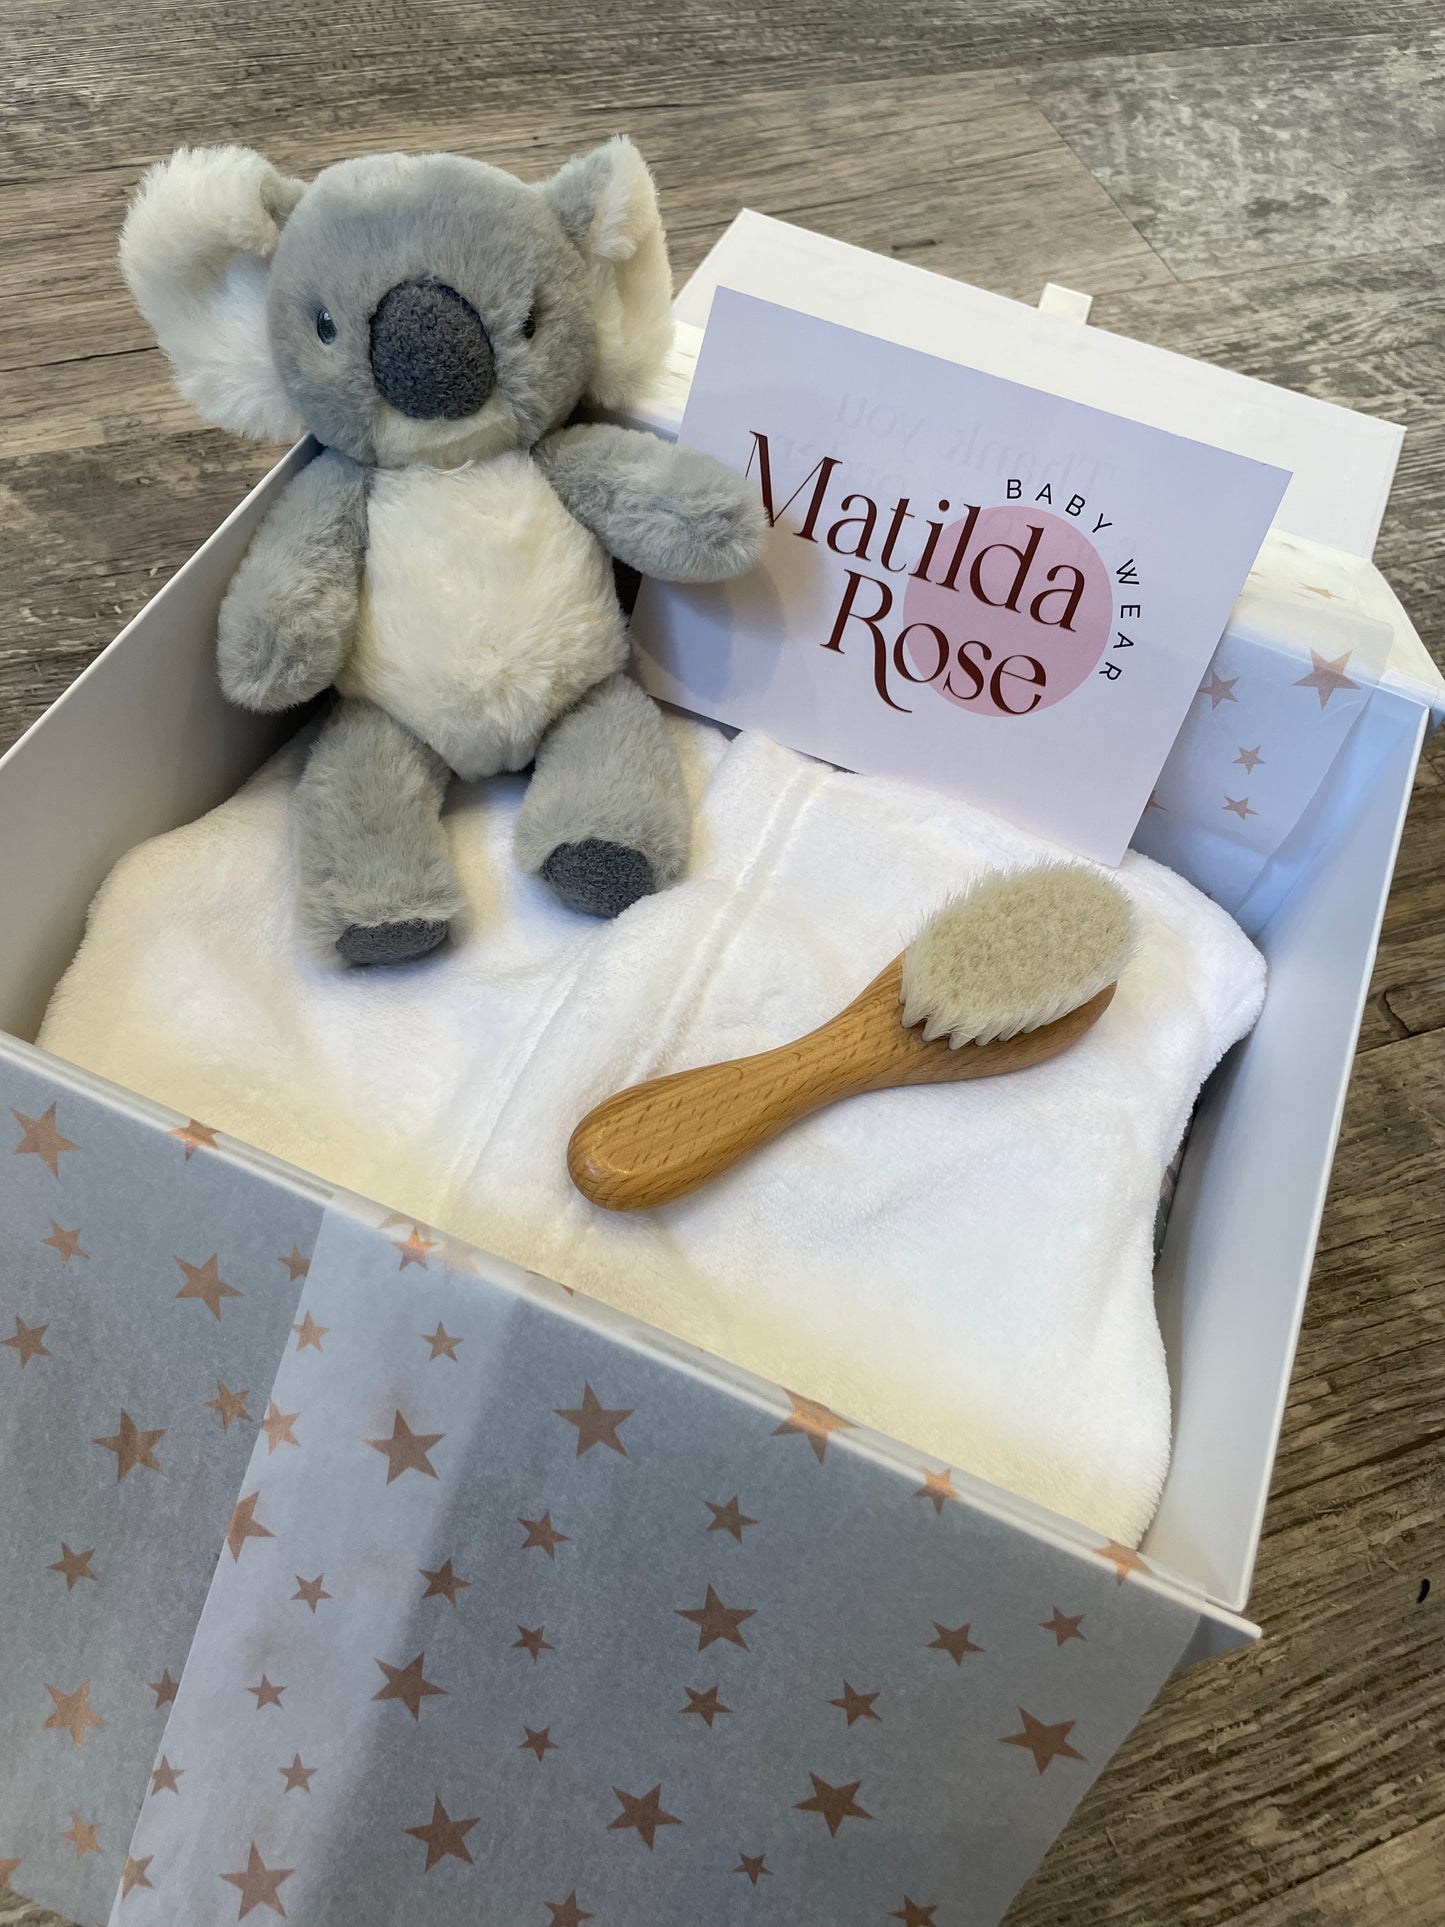 The Personalised dressing gown gift box